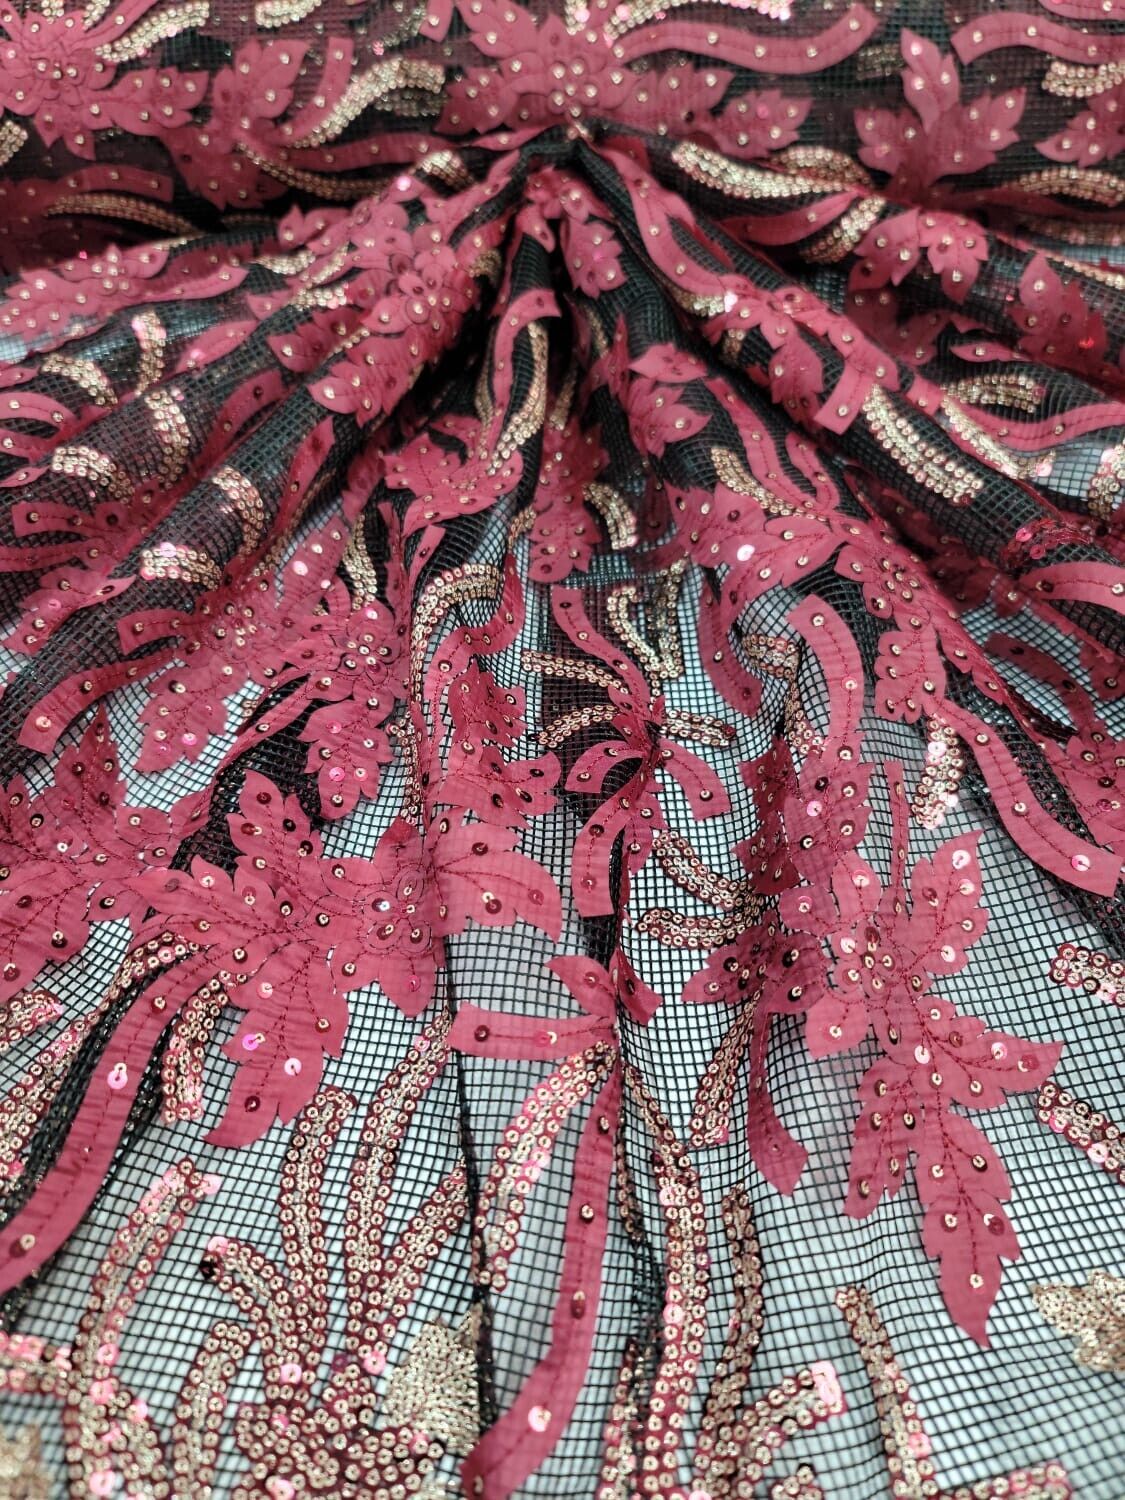 Burgundy Floral Embroidery Lace Fabric - Sold By The Yard - Black Fishnet Fabric